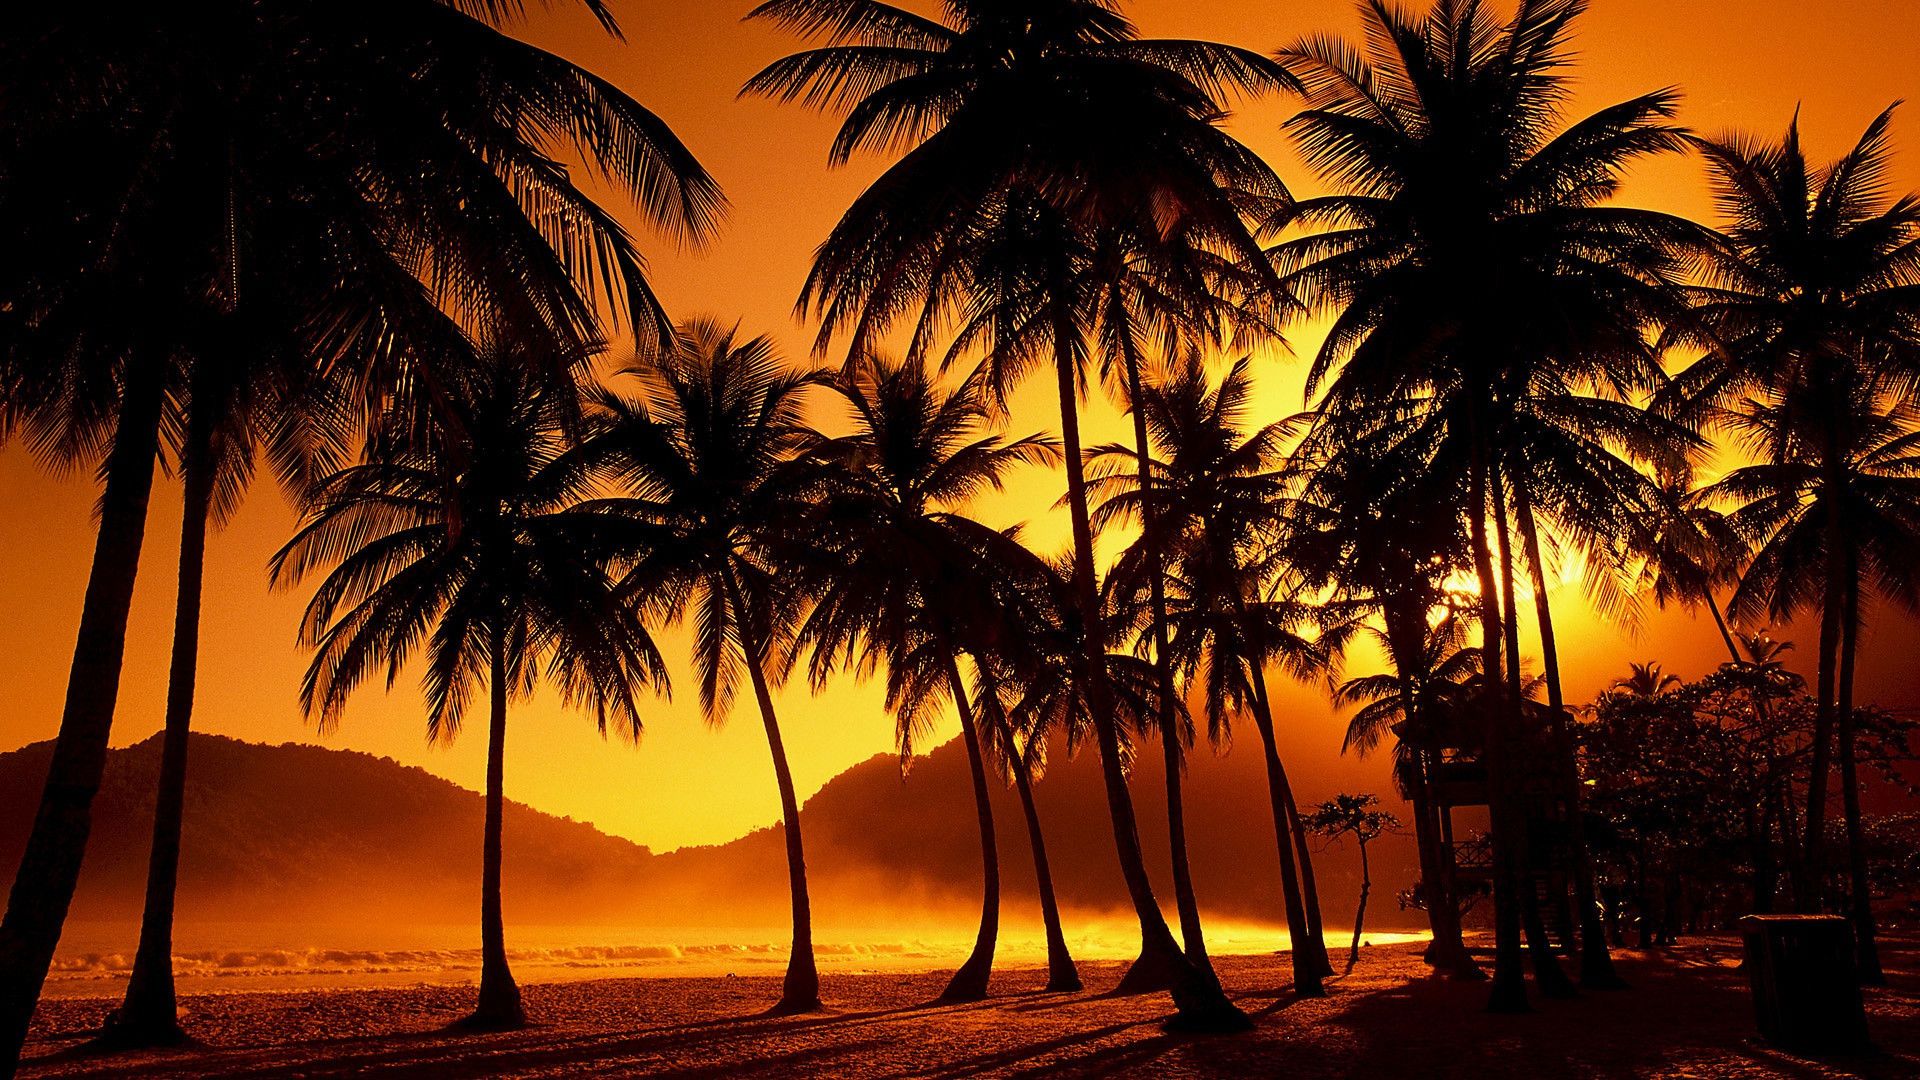 Tropical Sunset Wallpaper Free Tropical Sunset Background